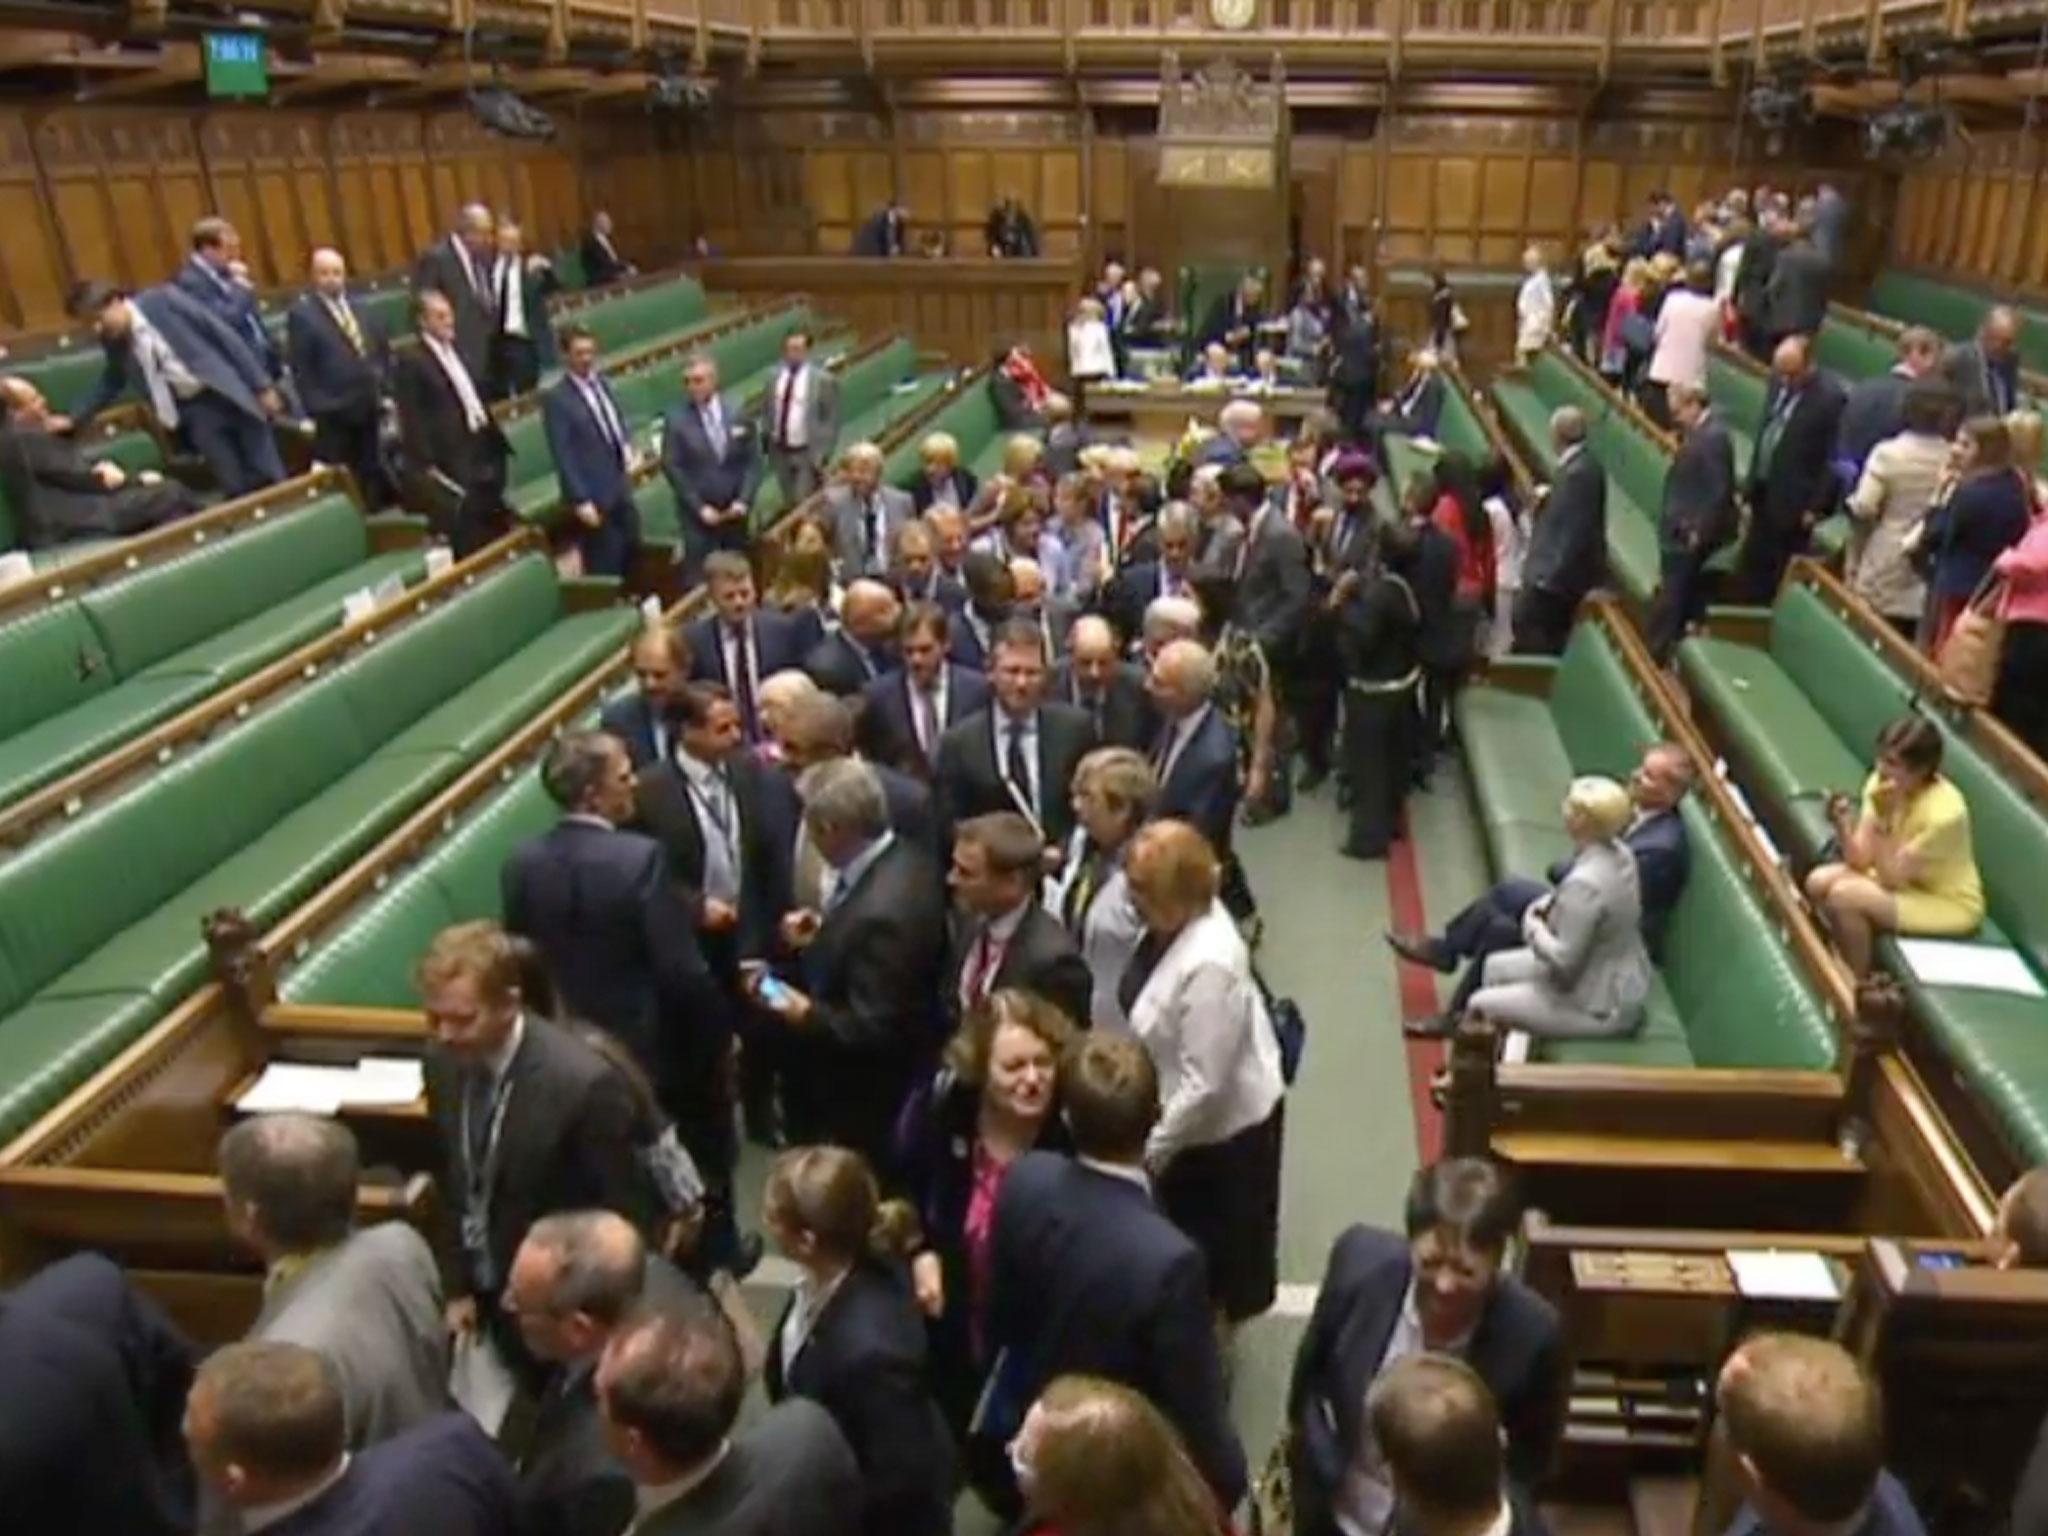 MPs voted down the motion to end the cuts and pay restraint by 323 votes to 309